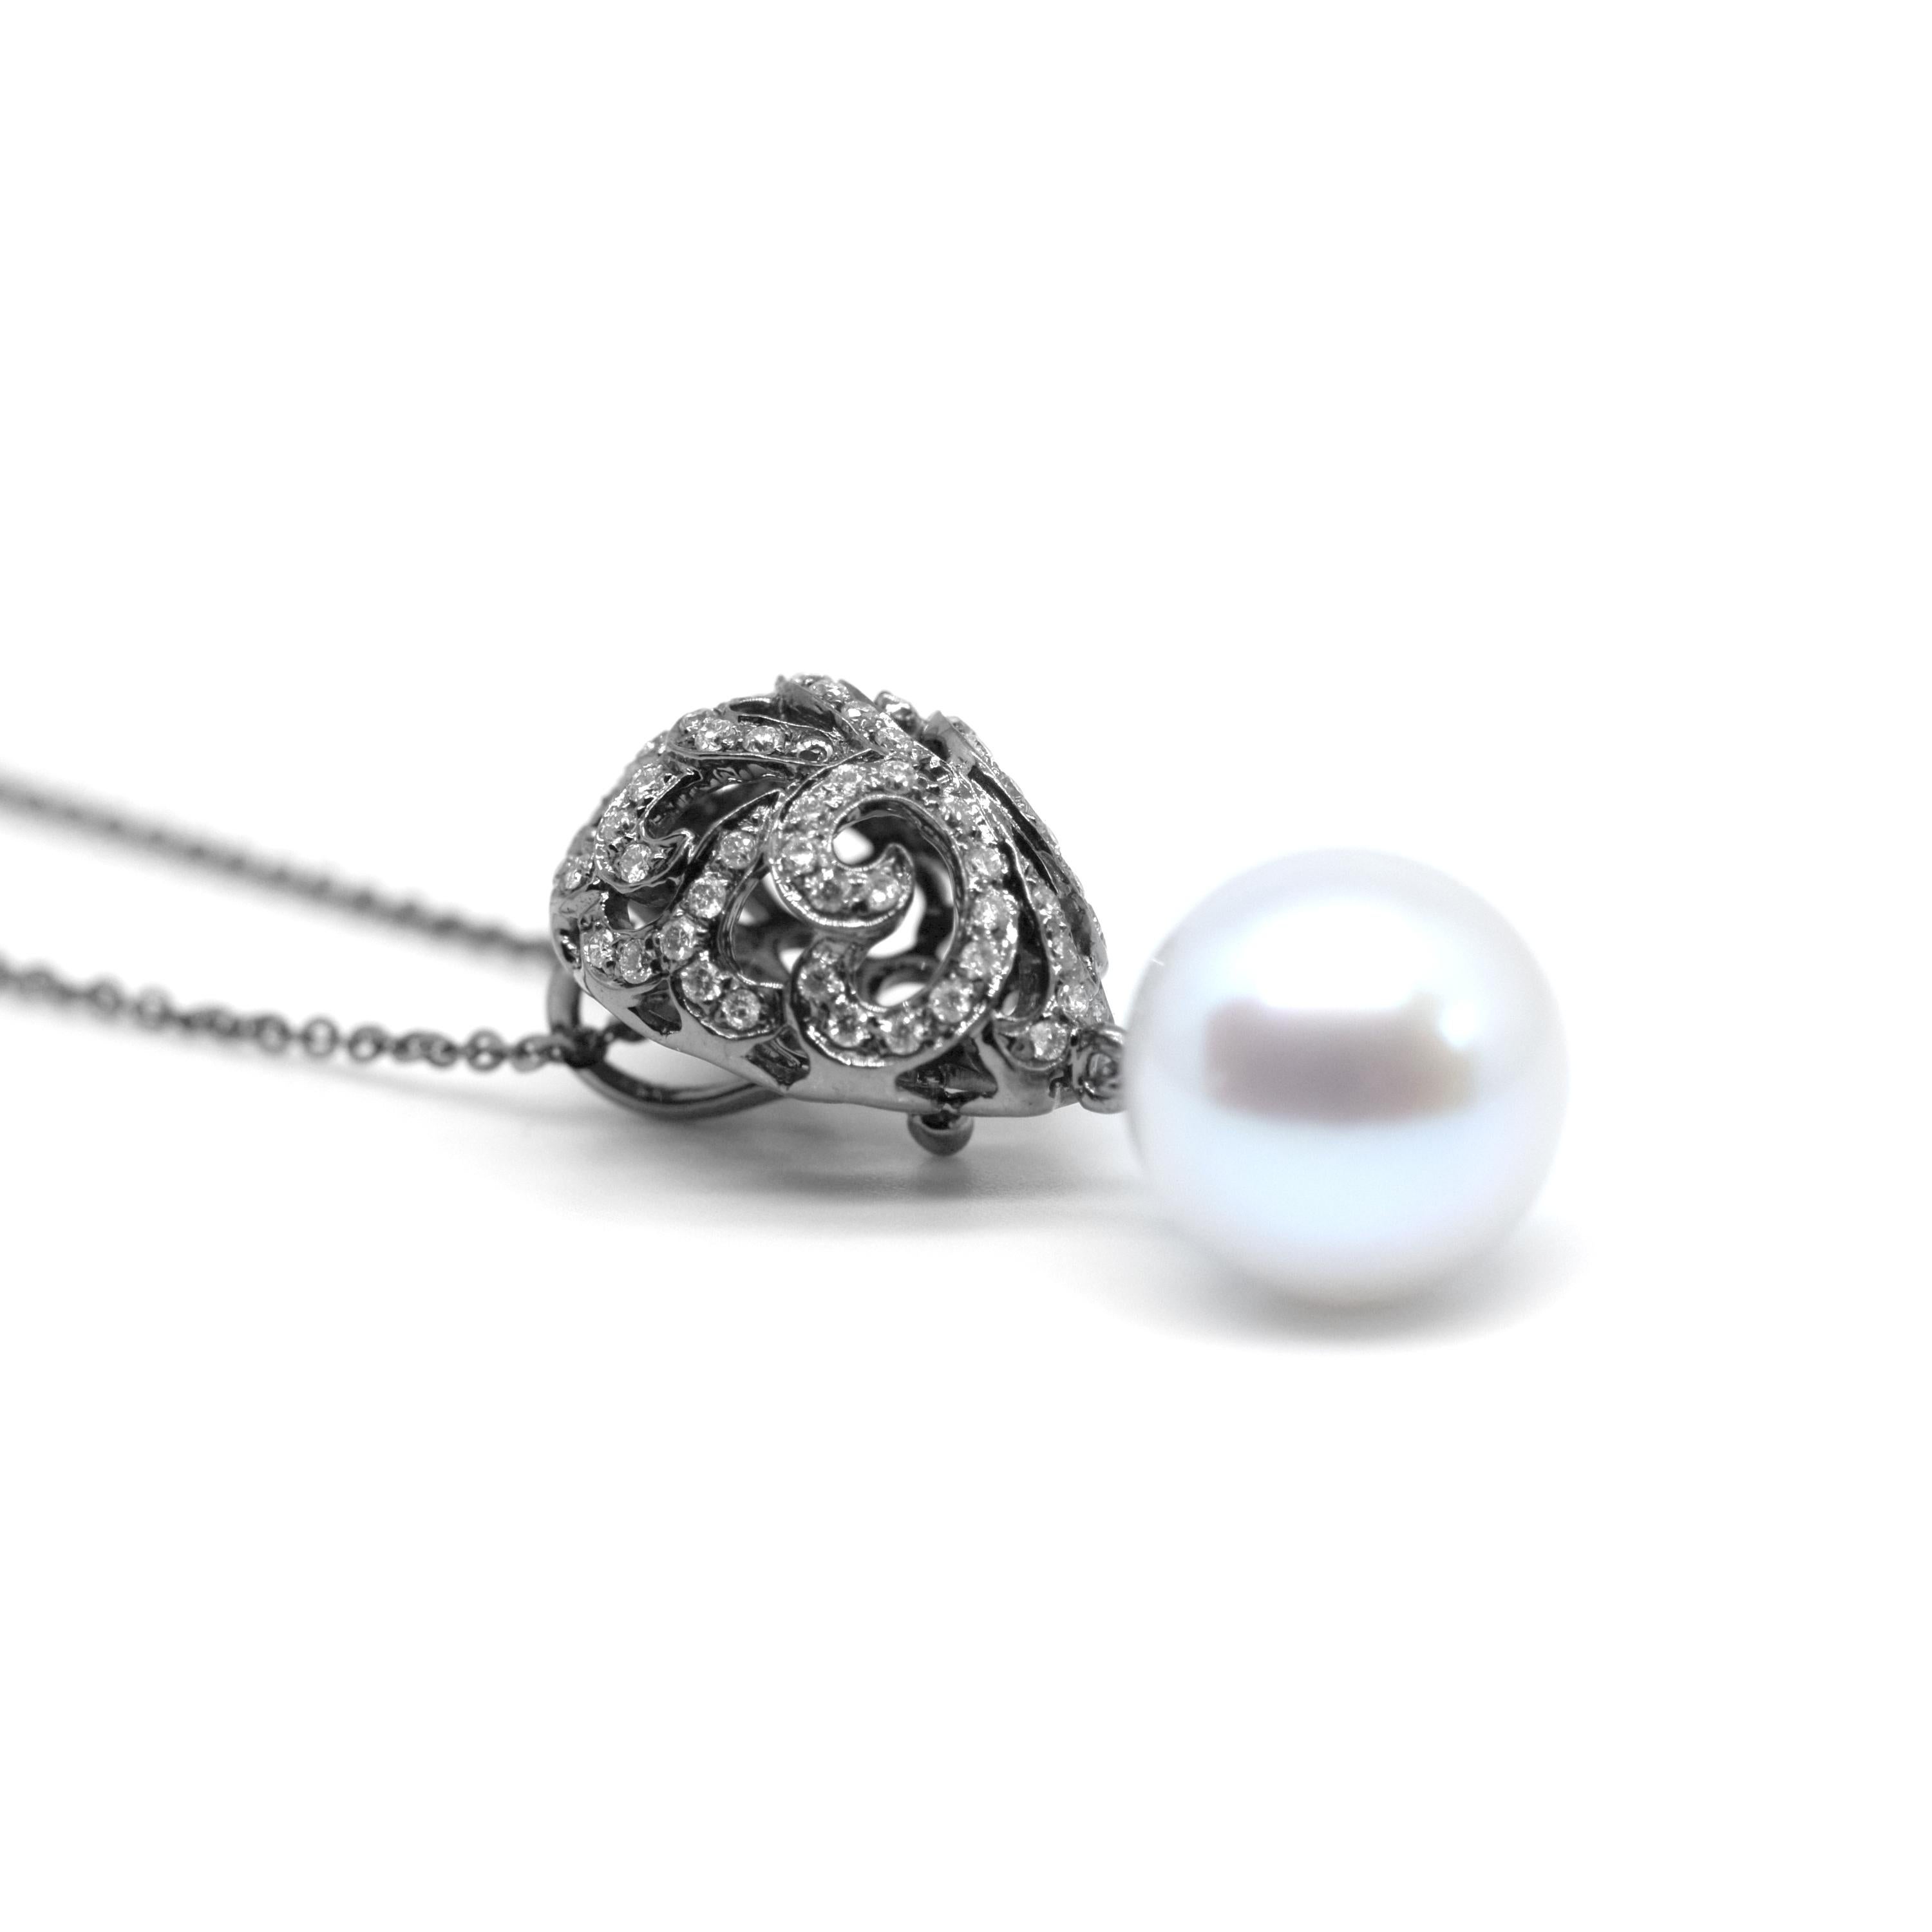 Emulating femininity and glamour, the Whispering collection is full of colour and form. Inspired by the twisting, sculptural shape of the exotic Orchid flower. Whispering pearl drop small domed filigree egg pendant with 0.22ct white diamonds and 9mm